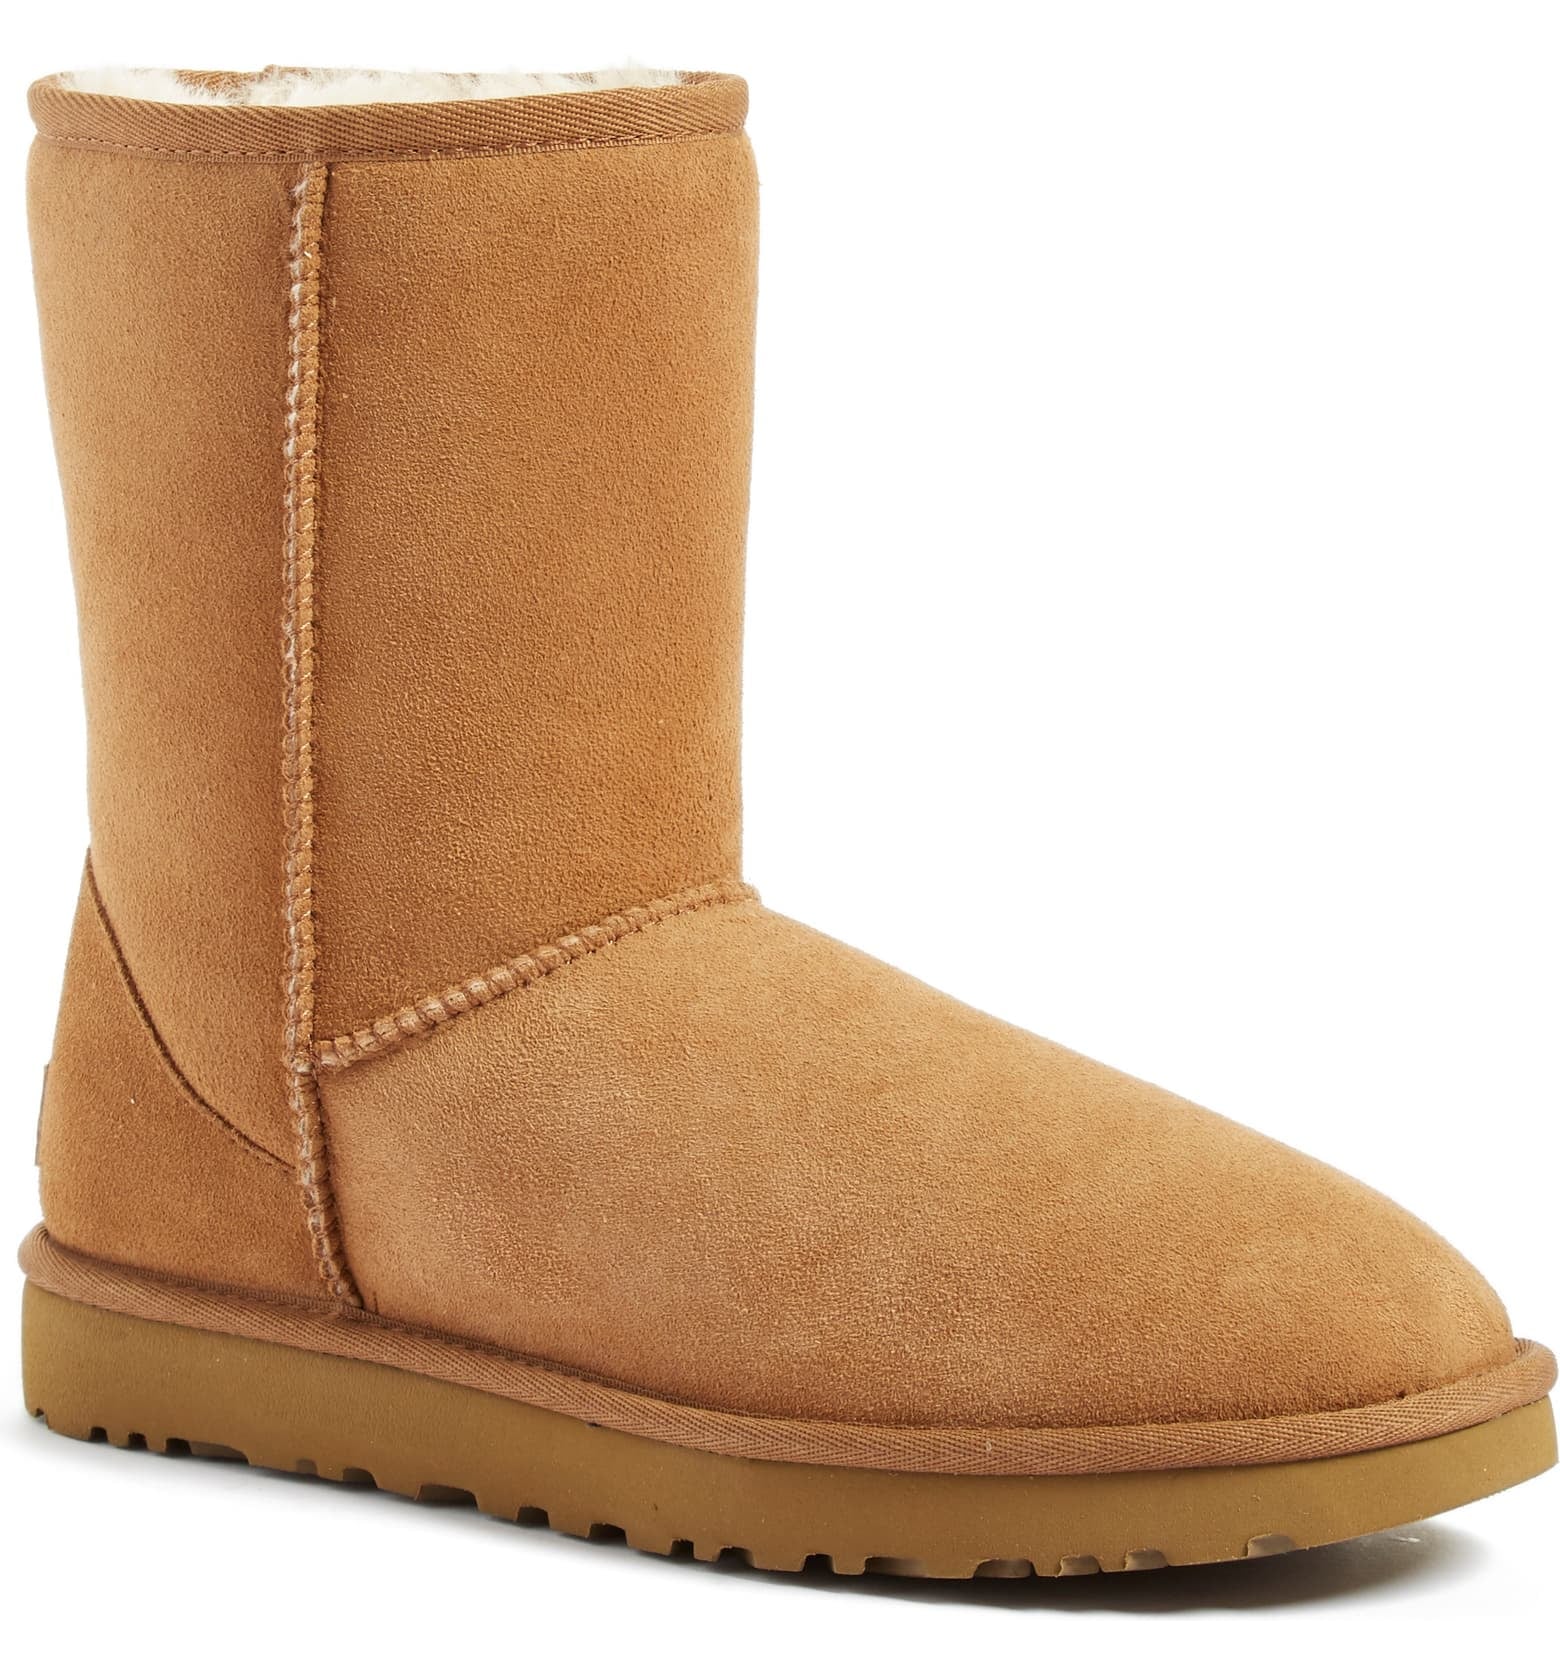 ugg boots official uk stockists